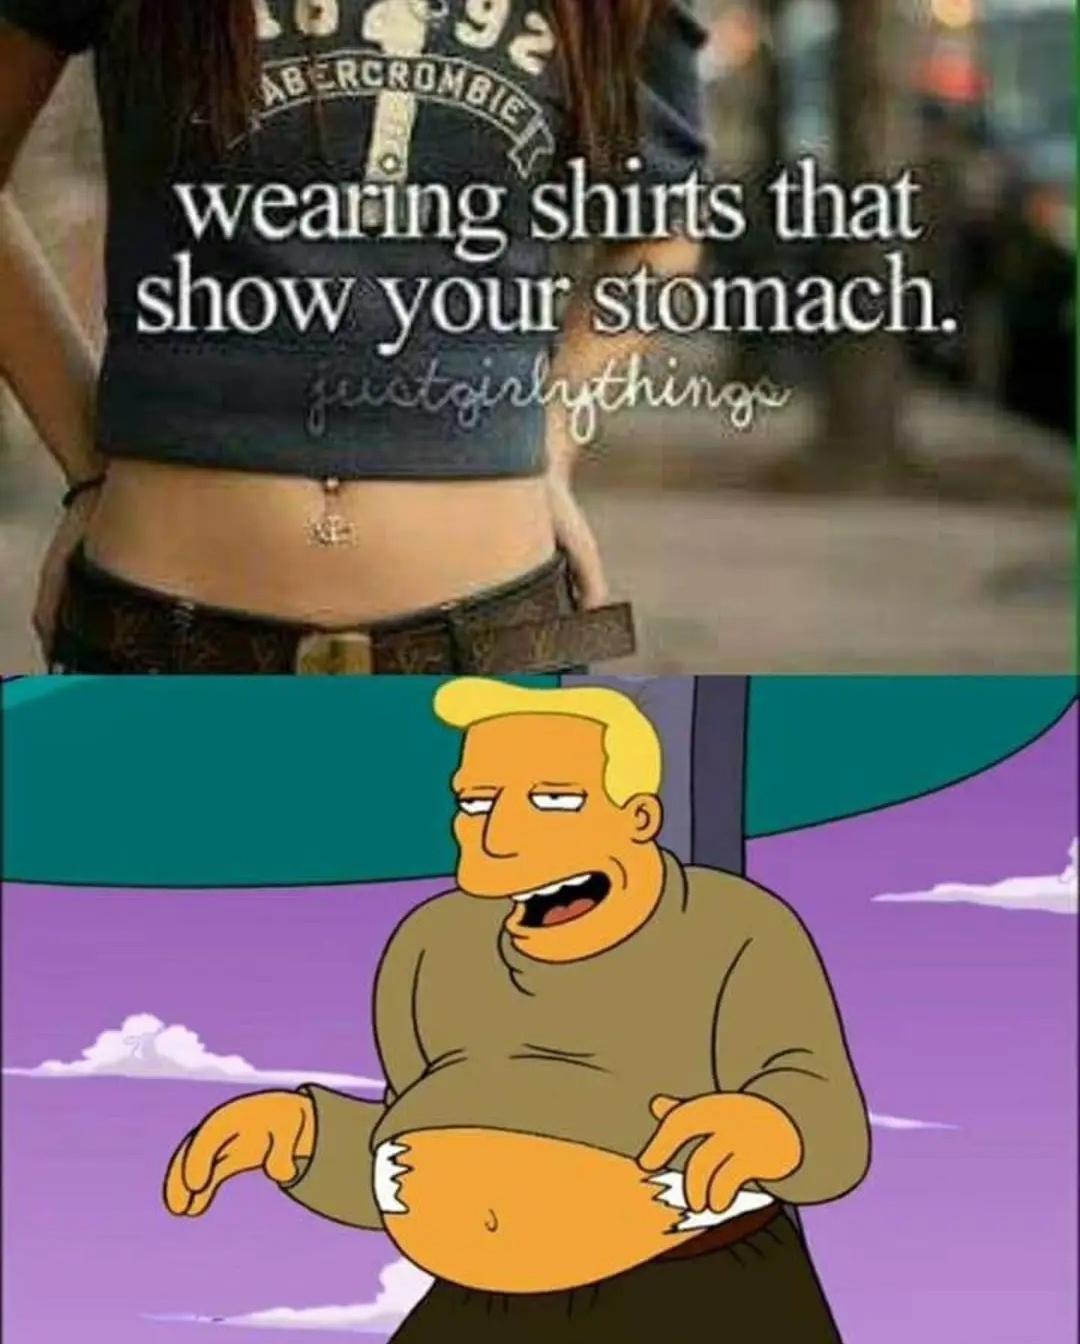 dank memes - cartoon - Bercrombie wearing shirts that show your stomach. justgirly things Ab J